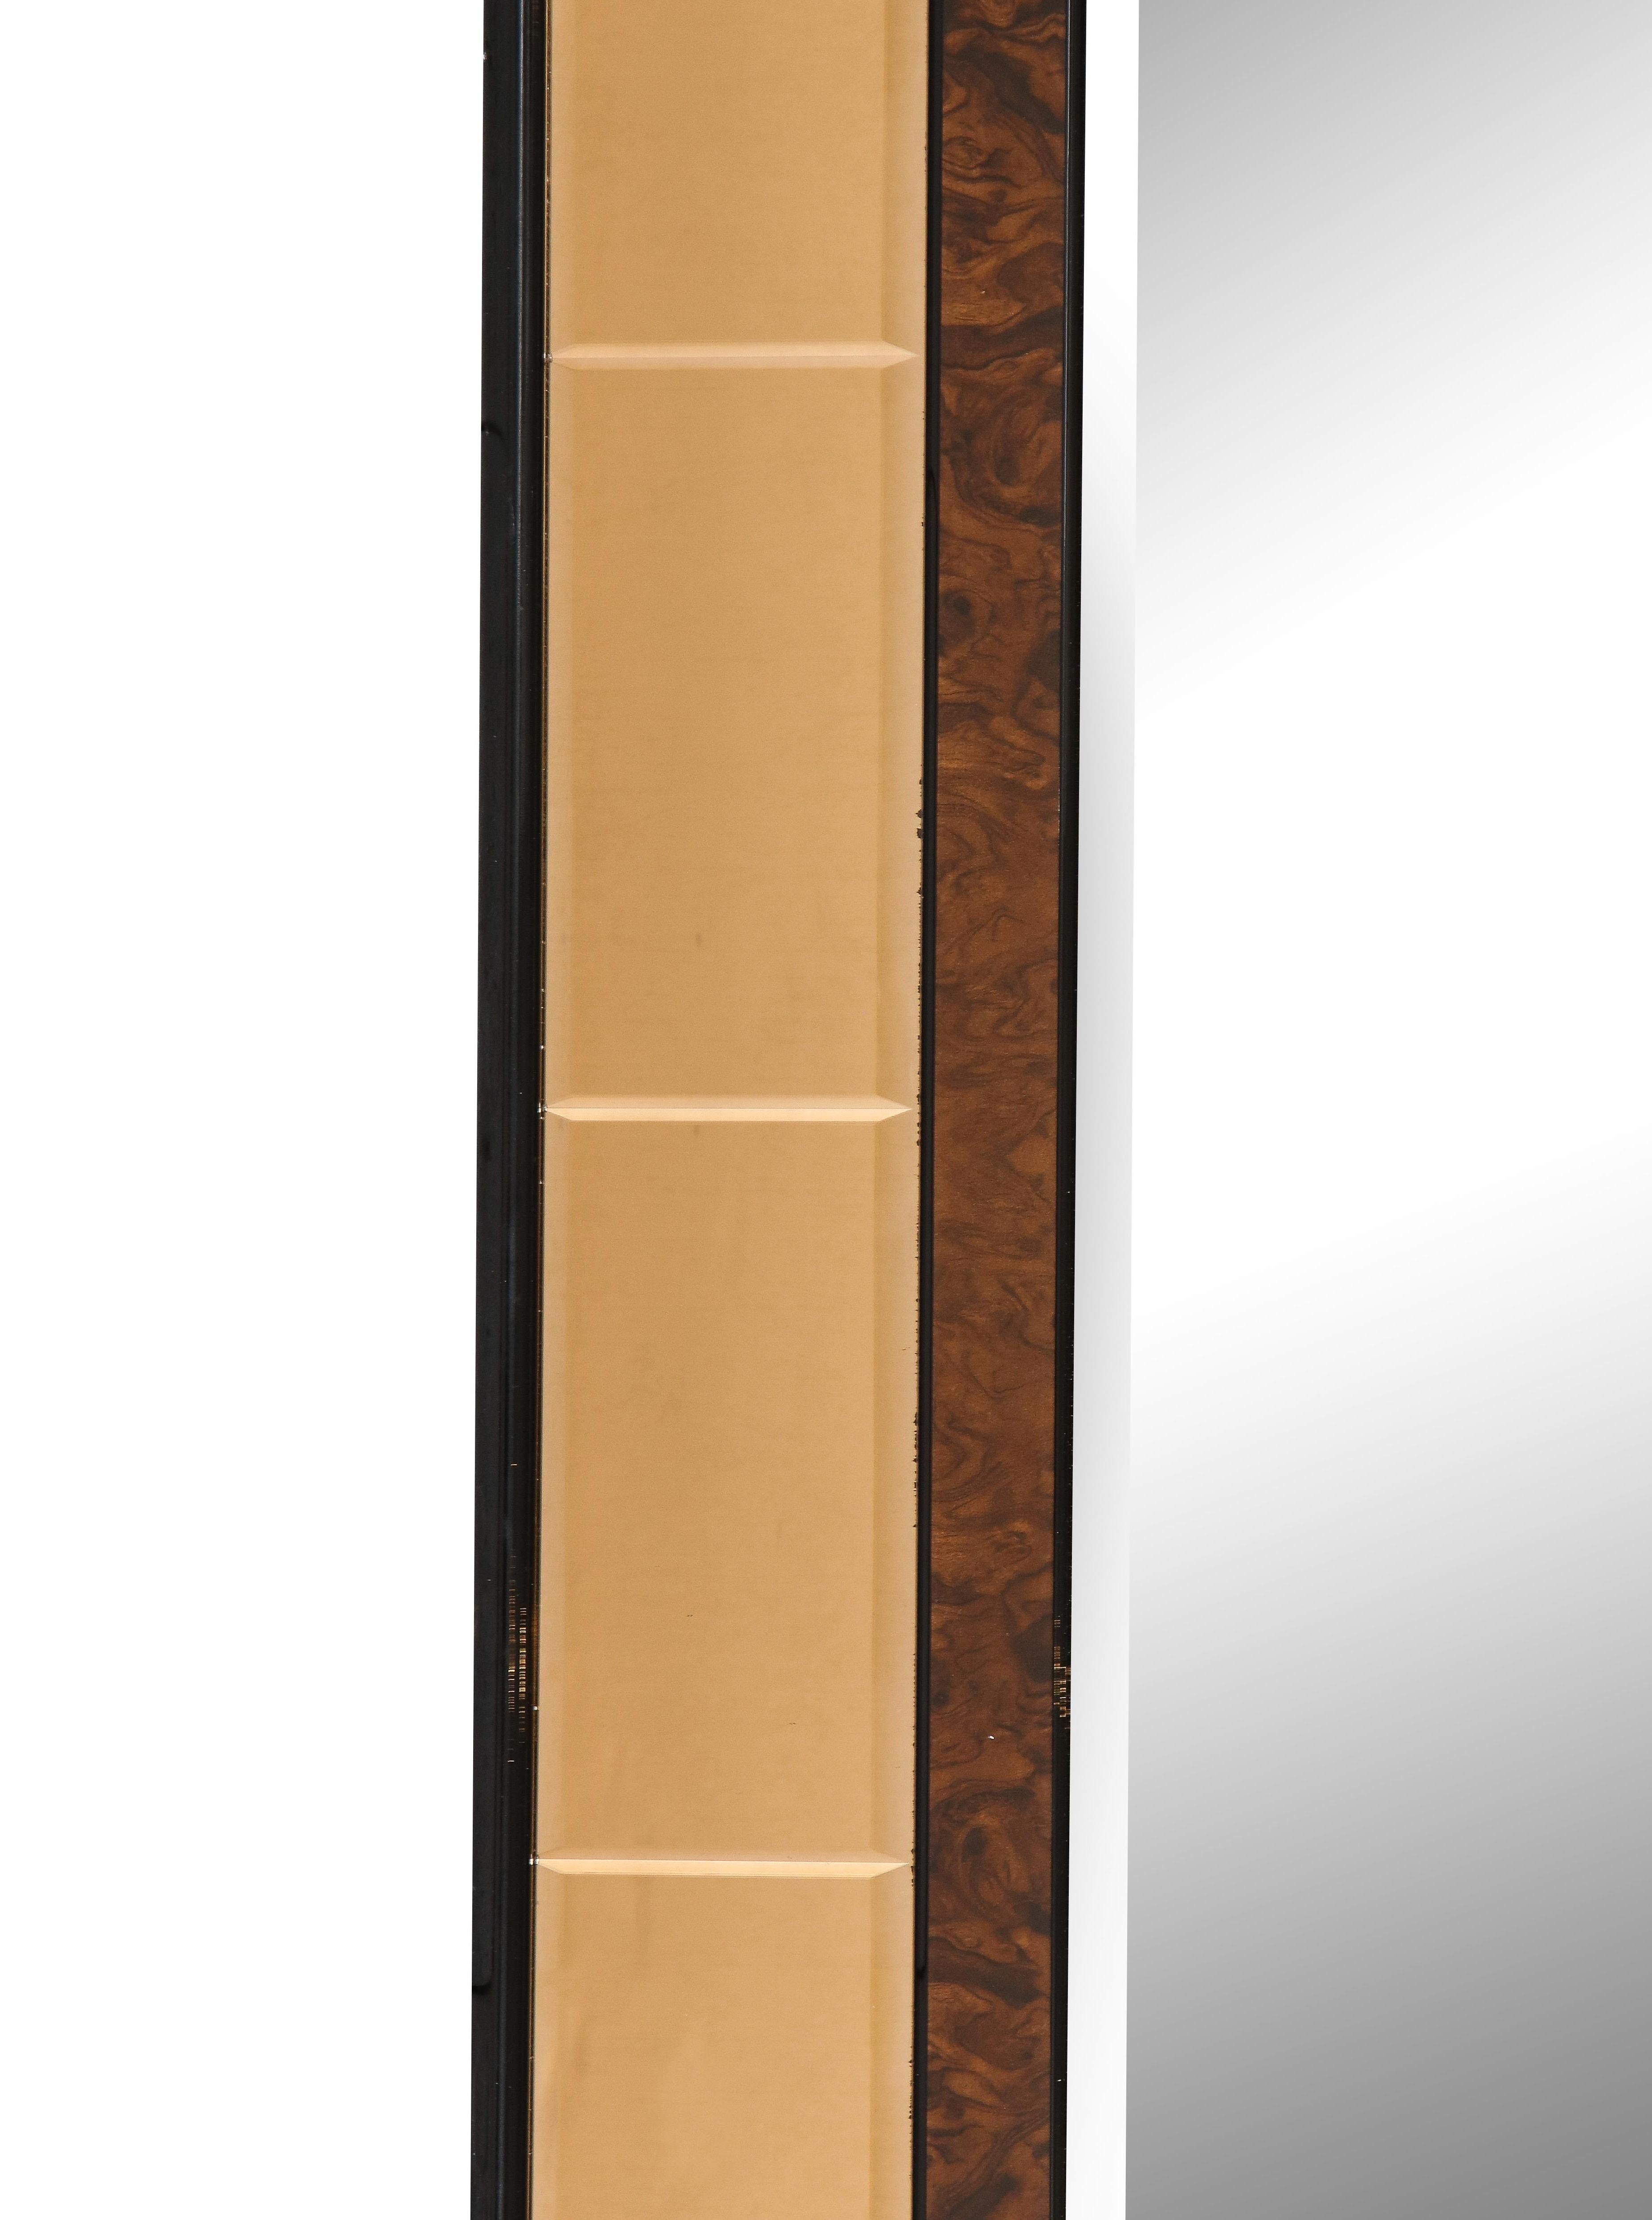 A monumentally sized Cristal Arte mirror with segmented beveled glass in a stunning amber/rose gold with an inner surround of burl wood which borders the inner clear glass, mounted on a wood back. The contrast of the burl wood and amber/rose gold